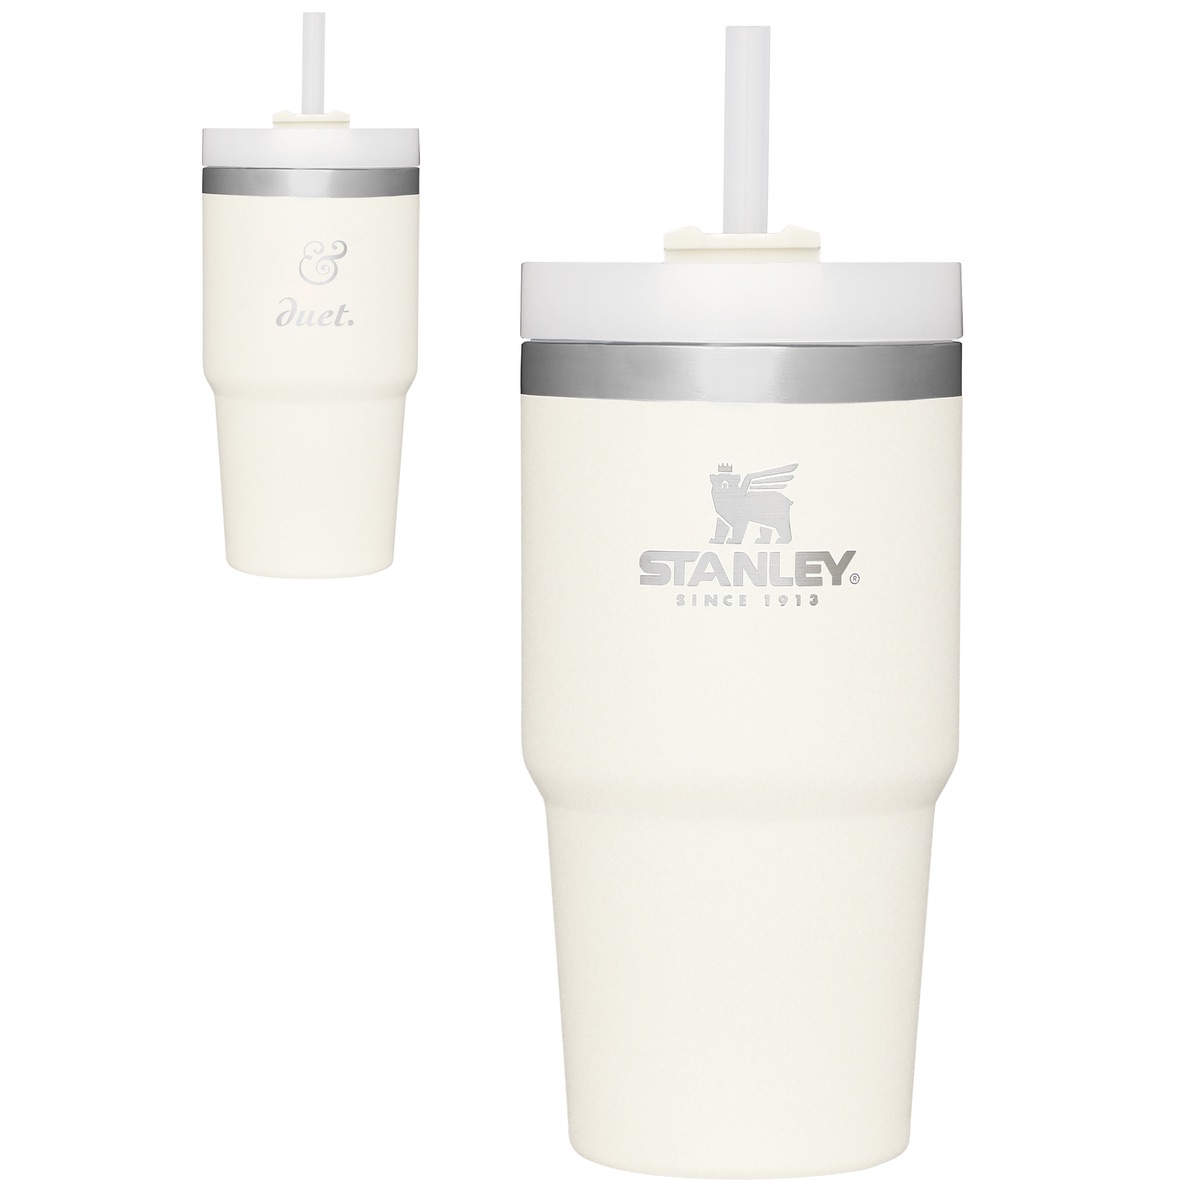 Stanley Quencher Tumblers Now Come in Limited Edition Holiday Designs —  Grab One Before They Sell Out